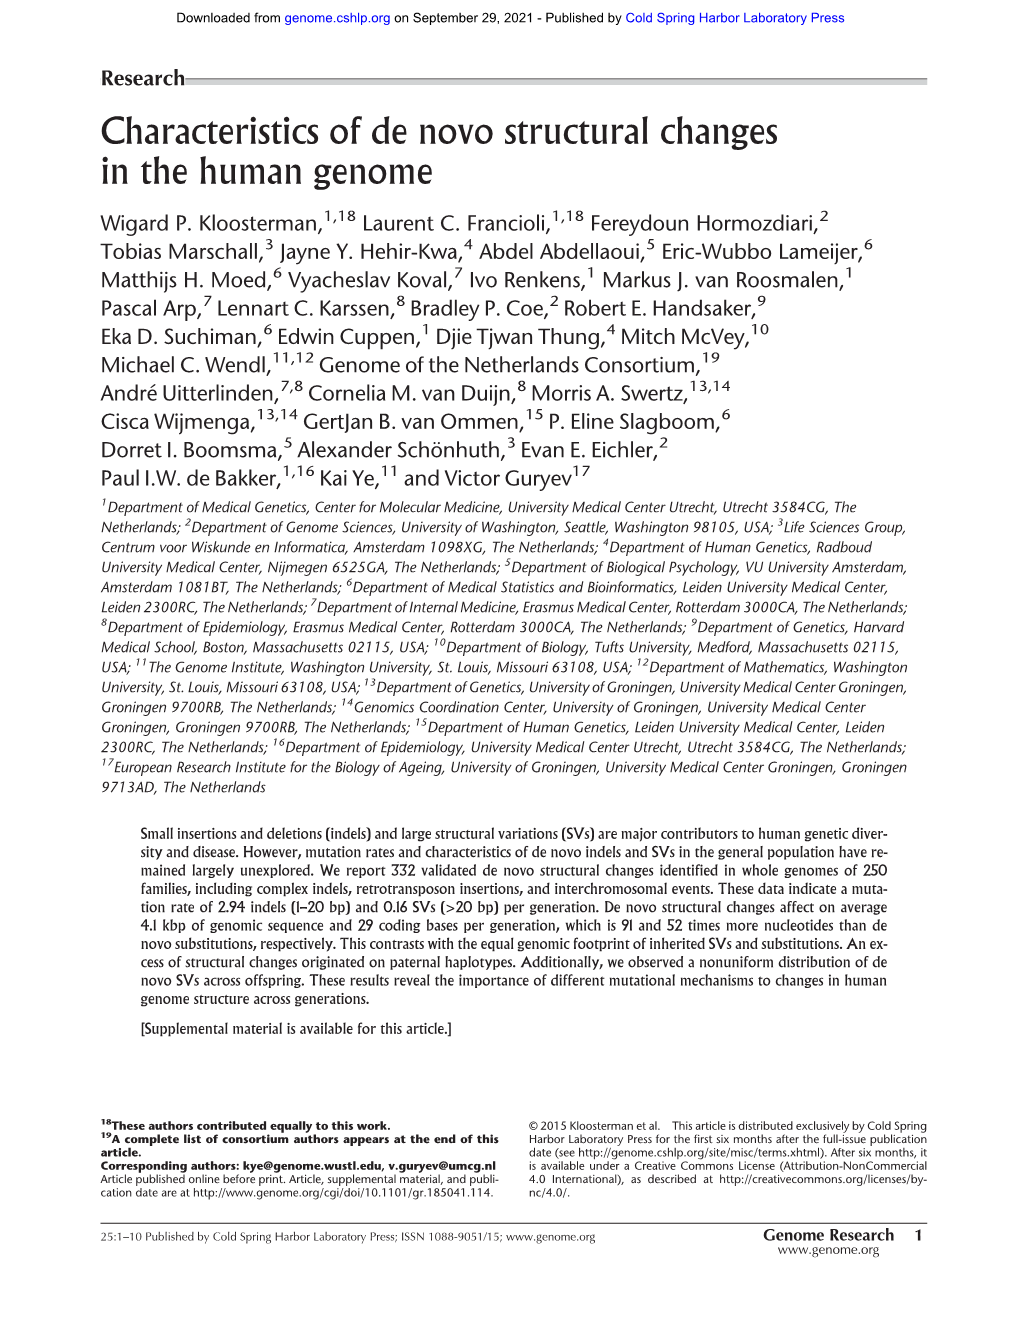 Characteristics of De Novo Structural Changes in the Human Genome